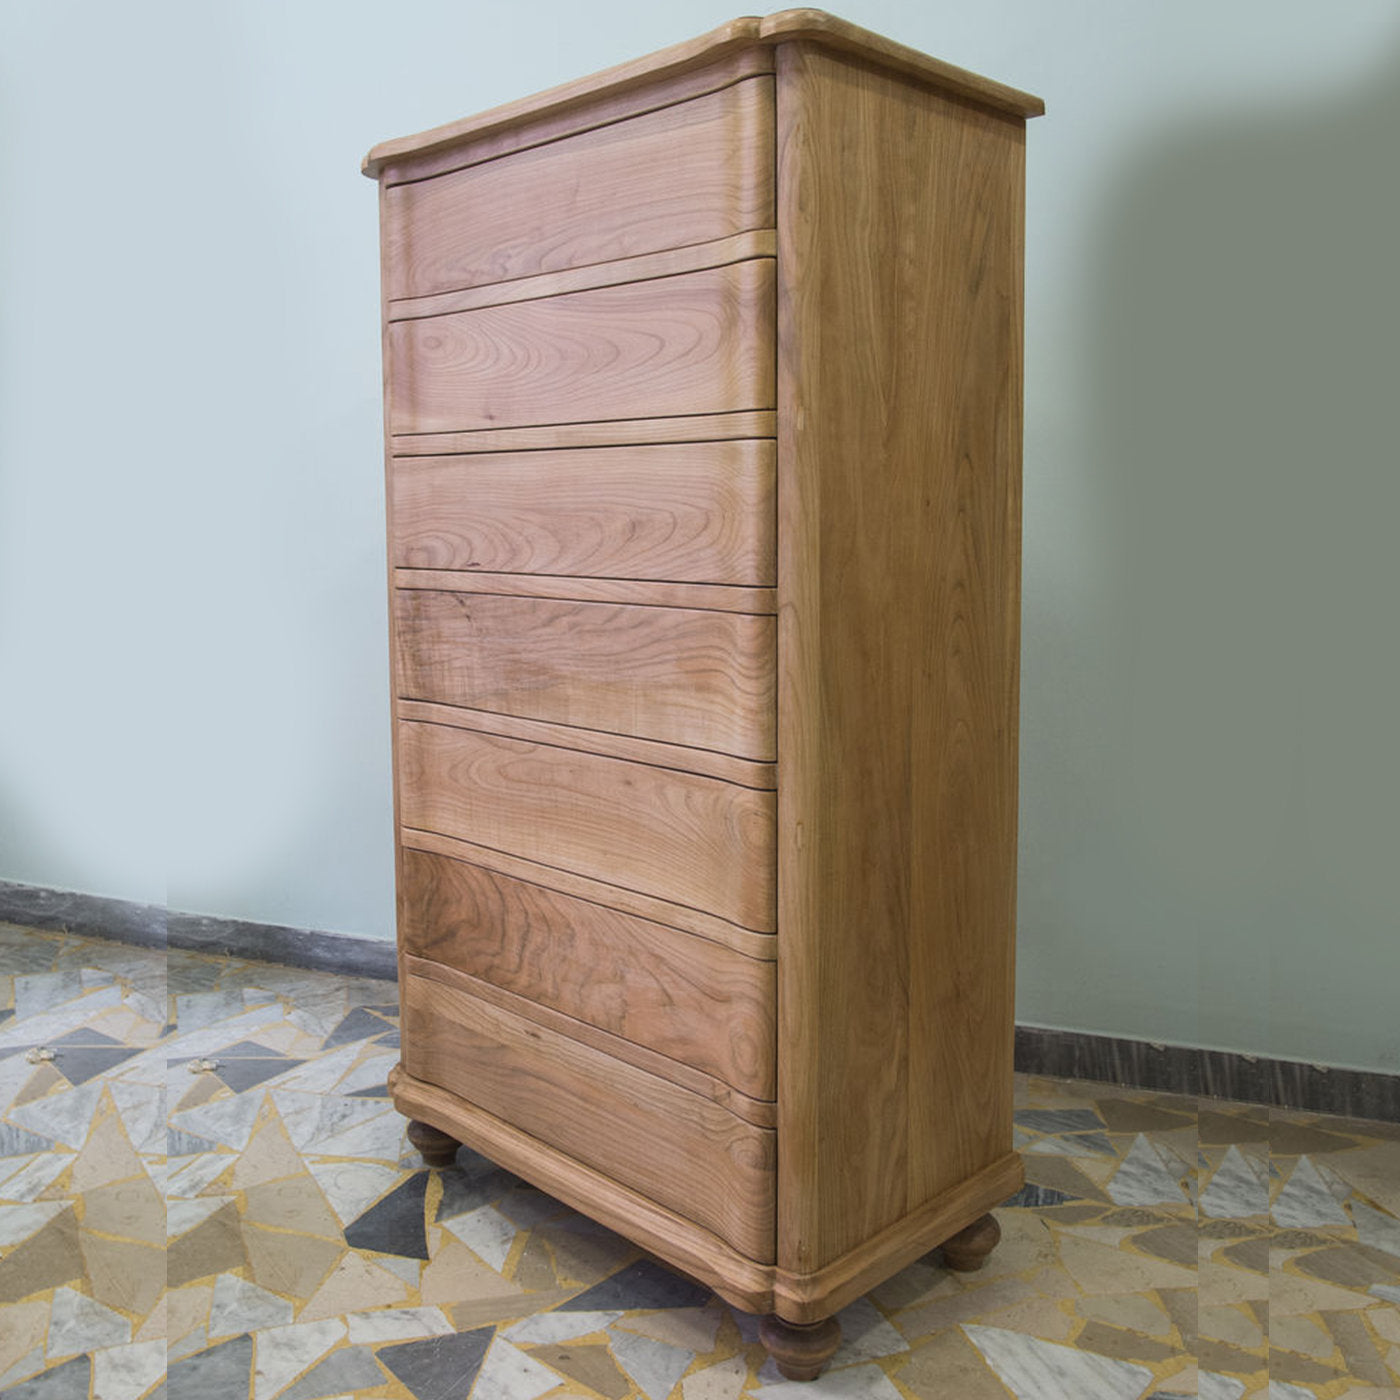 Eugenio Chest of Drawers by Erika Gambella - Alternative view 3